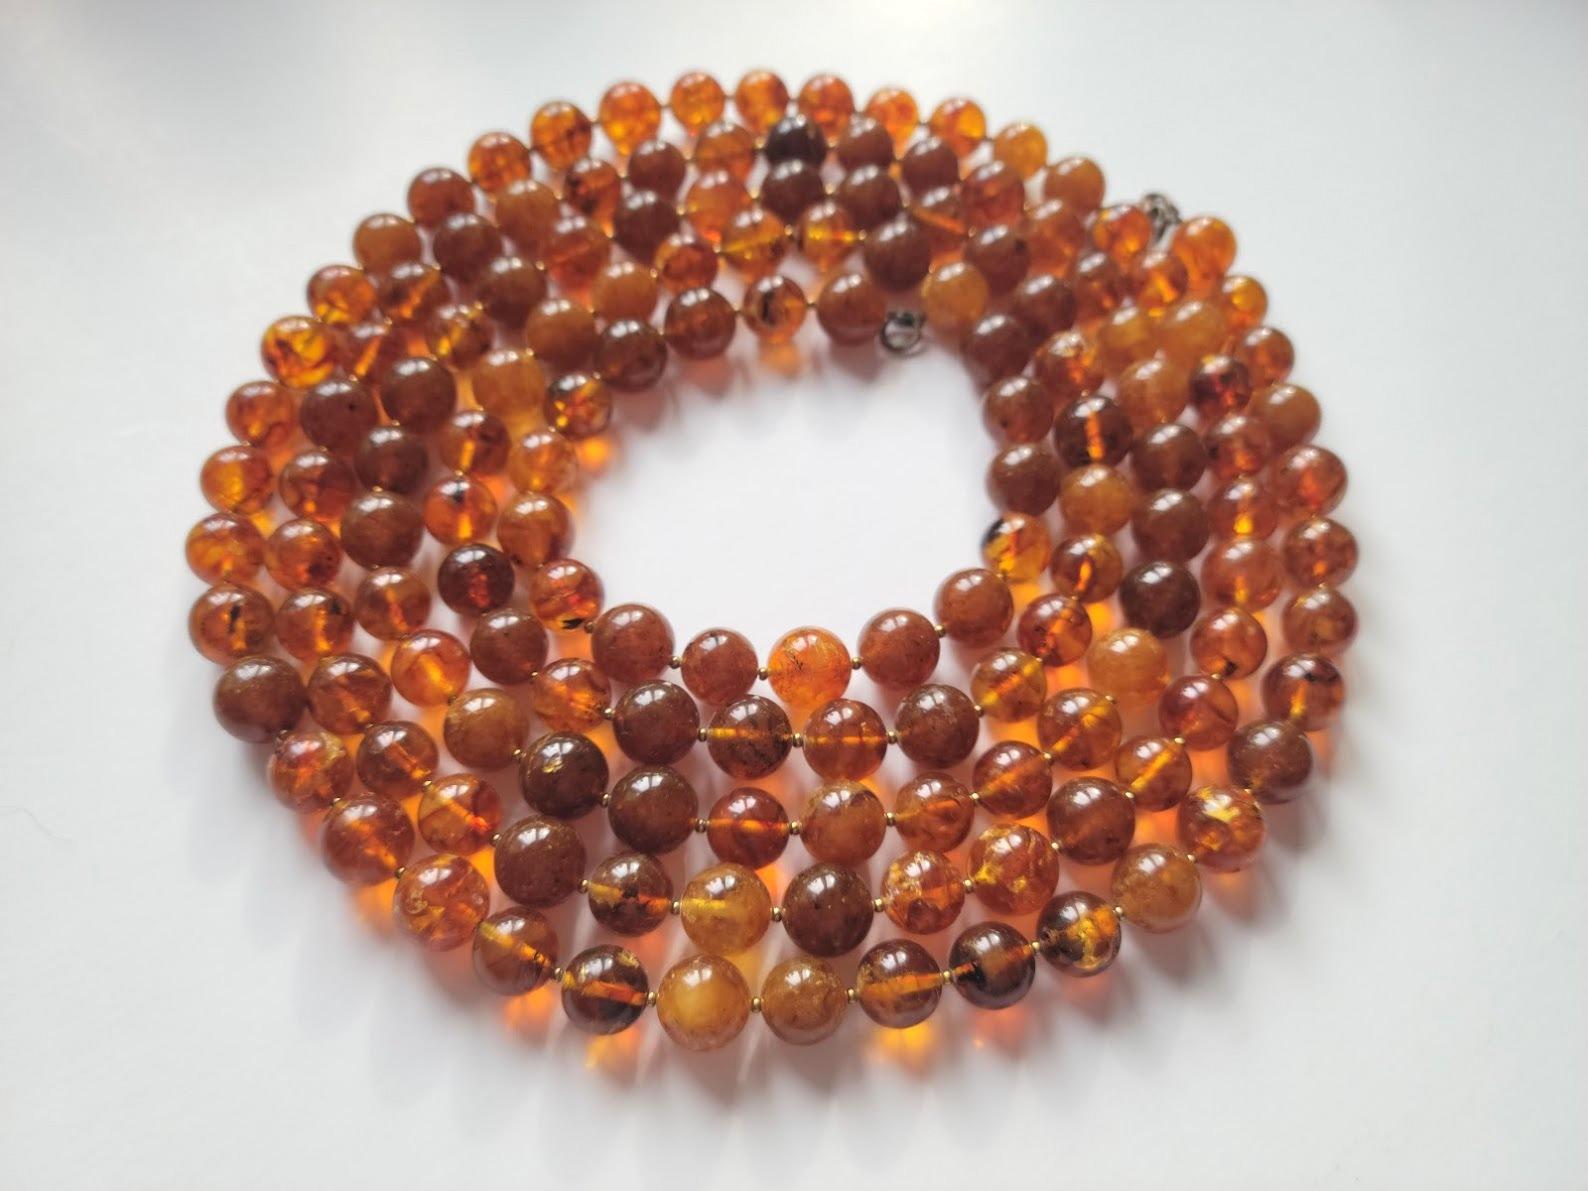 The length of the necklace is 72 inches (183 cm).
Beautiful beads from rare genuine Baltic amber from Kaliningrad Amber Factory, Russia.
The size of the smooth round amber beads is 12mm.
The beads are semi-transparent. The color of amber is color is